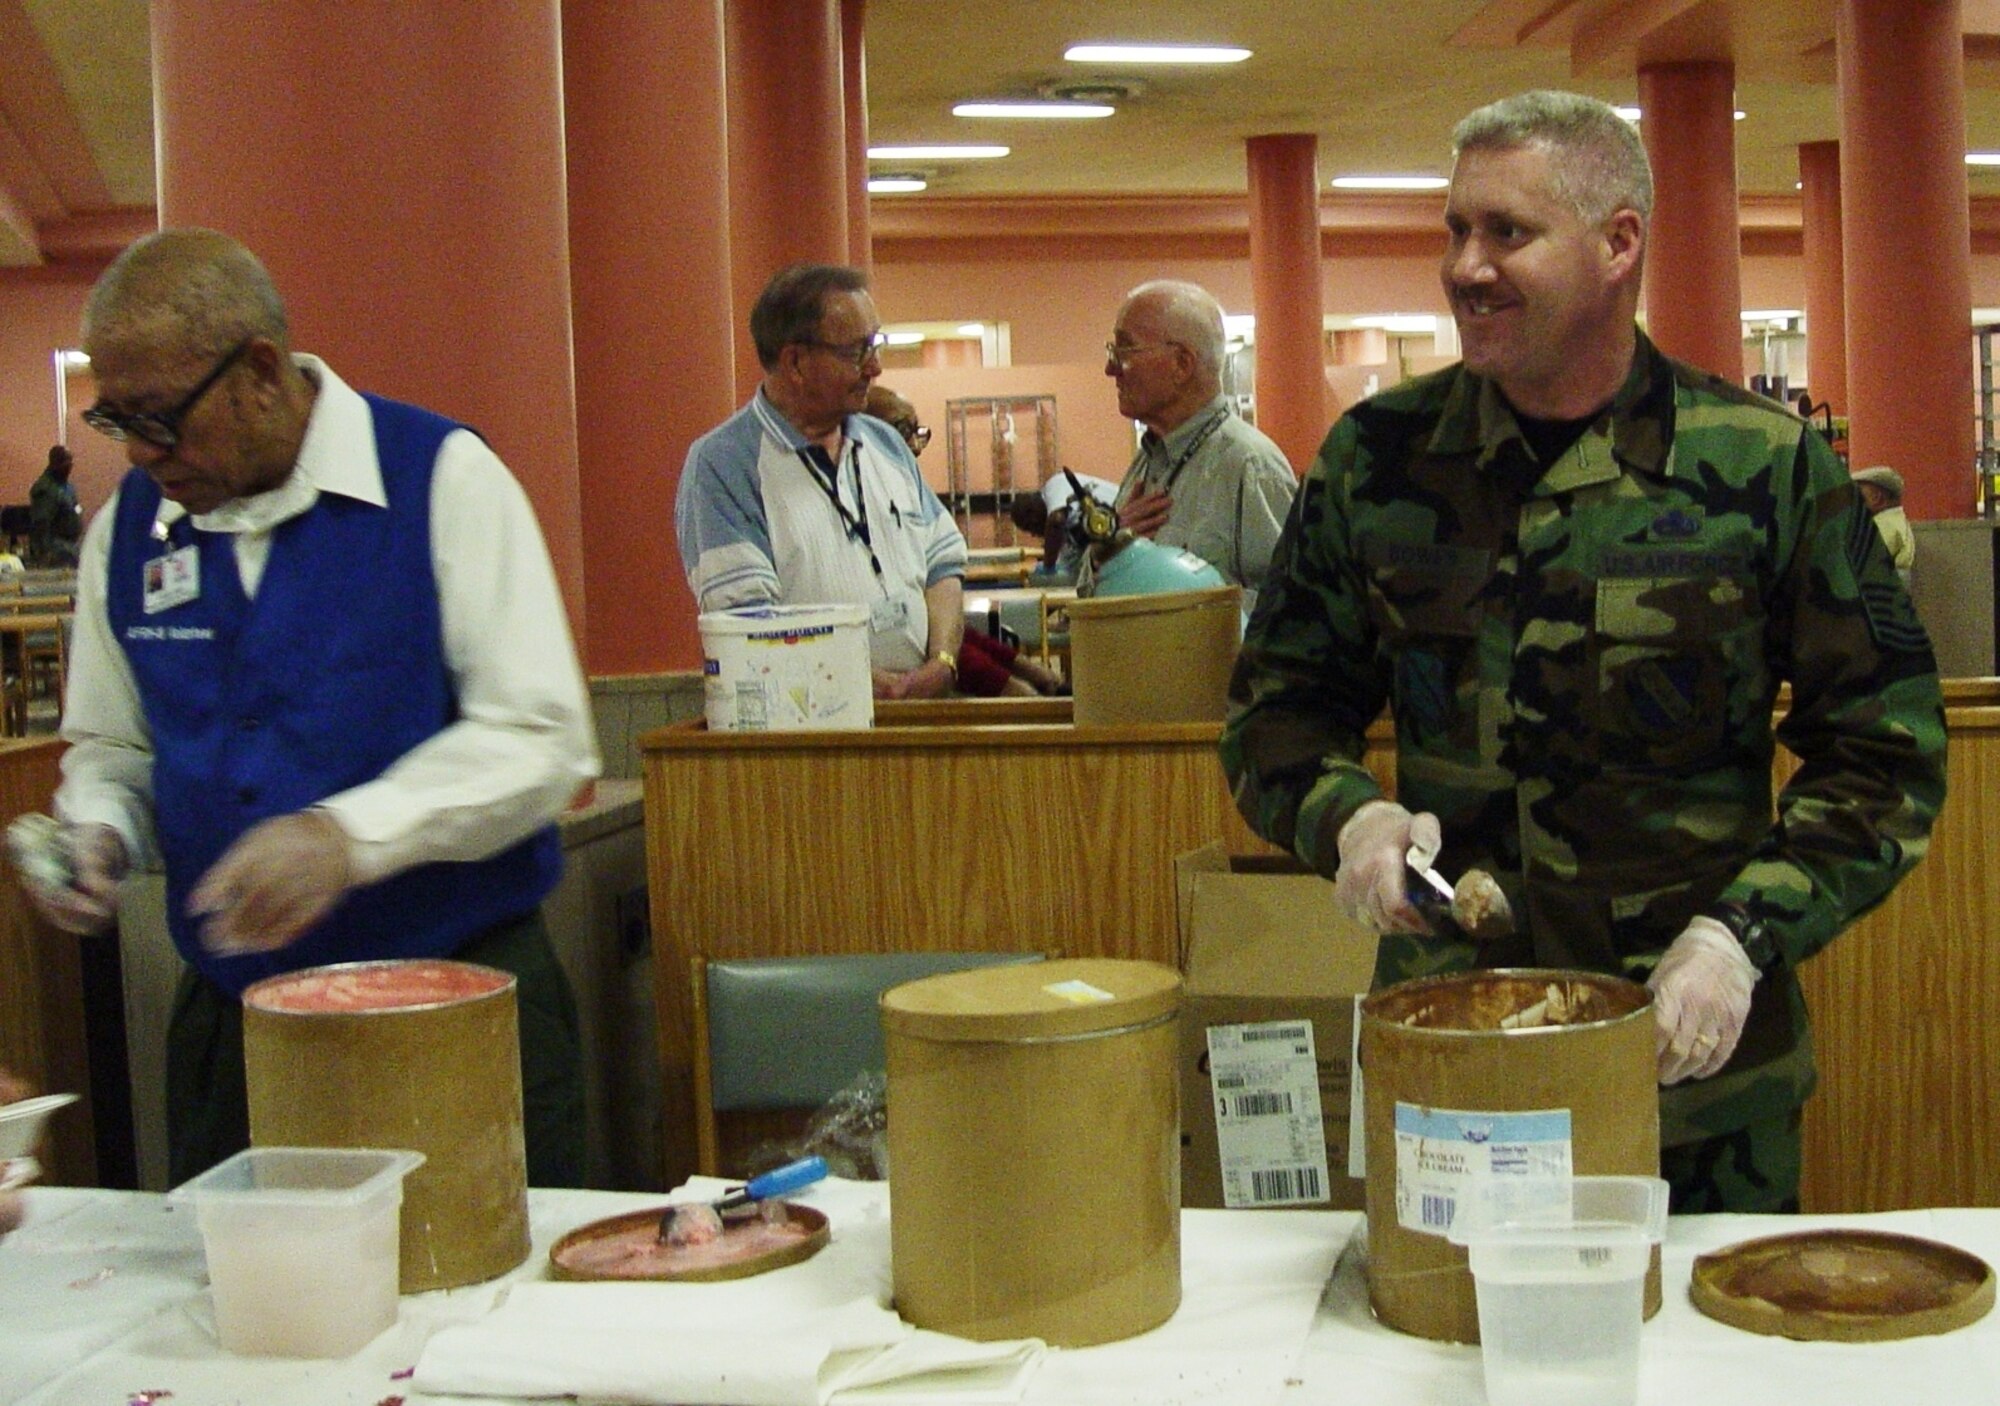 CMSgt. Jeffery K. Bowes, Command Chief MSgt. of 11th Wing, right, is ready to serve ice cream to residents at the Armed Forces Retirement Home in Washington D. C. during the home's monthly ice cream social.  Air Force photo by Capt. Tara Bush